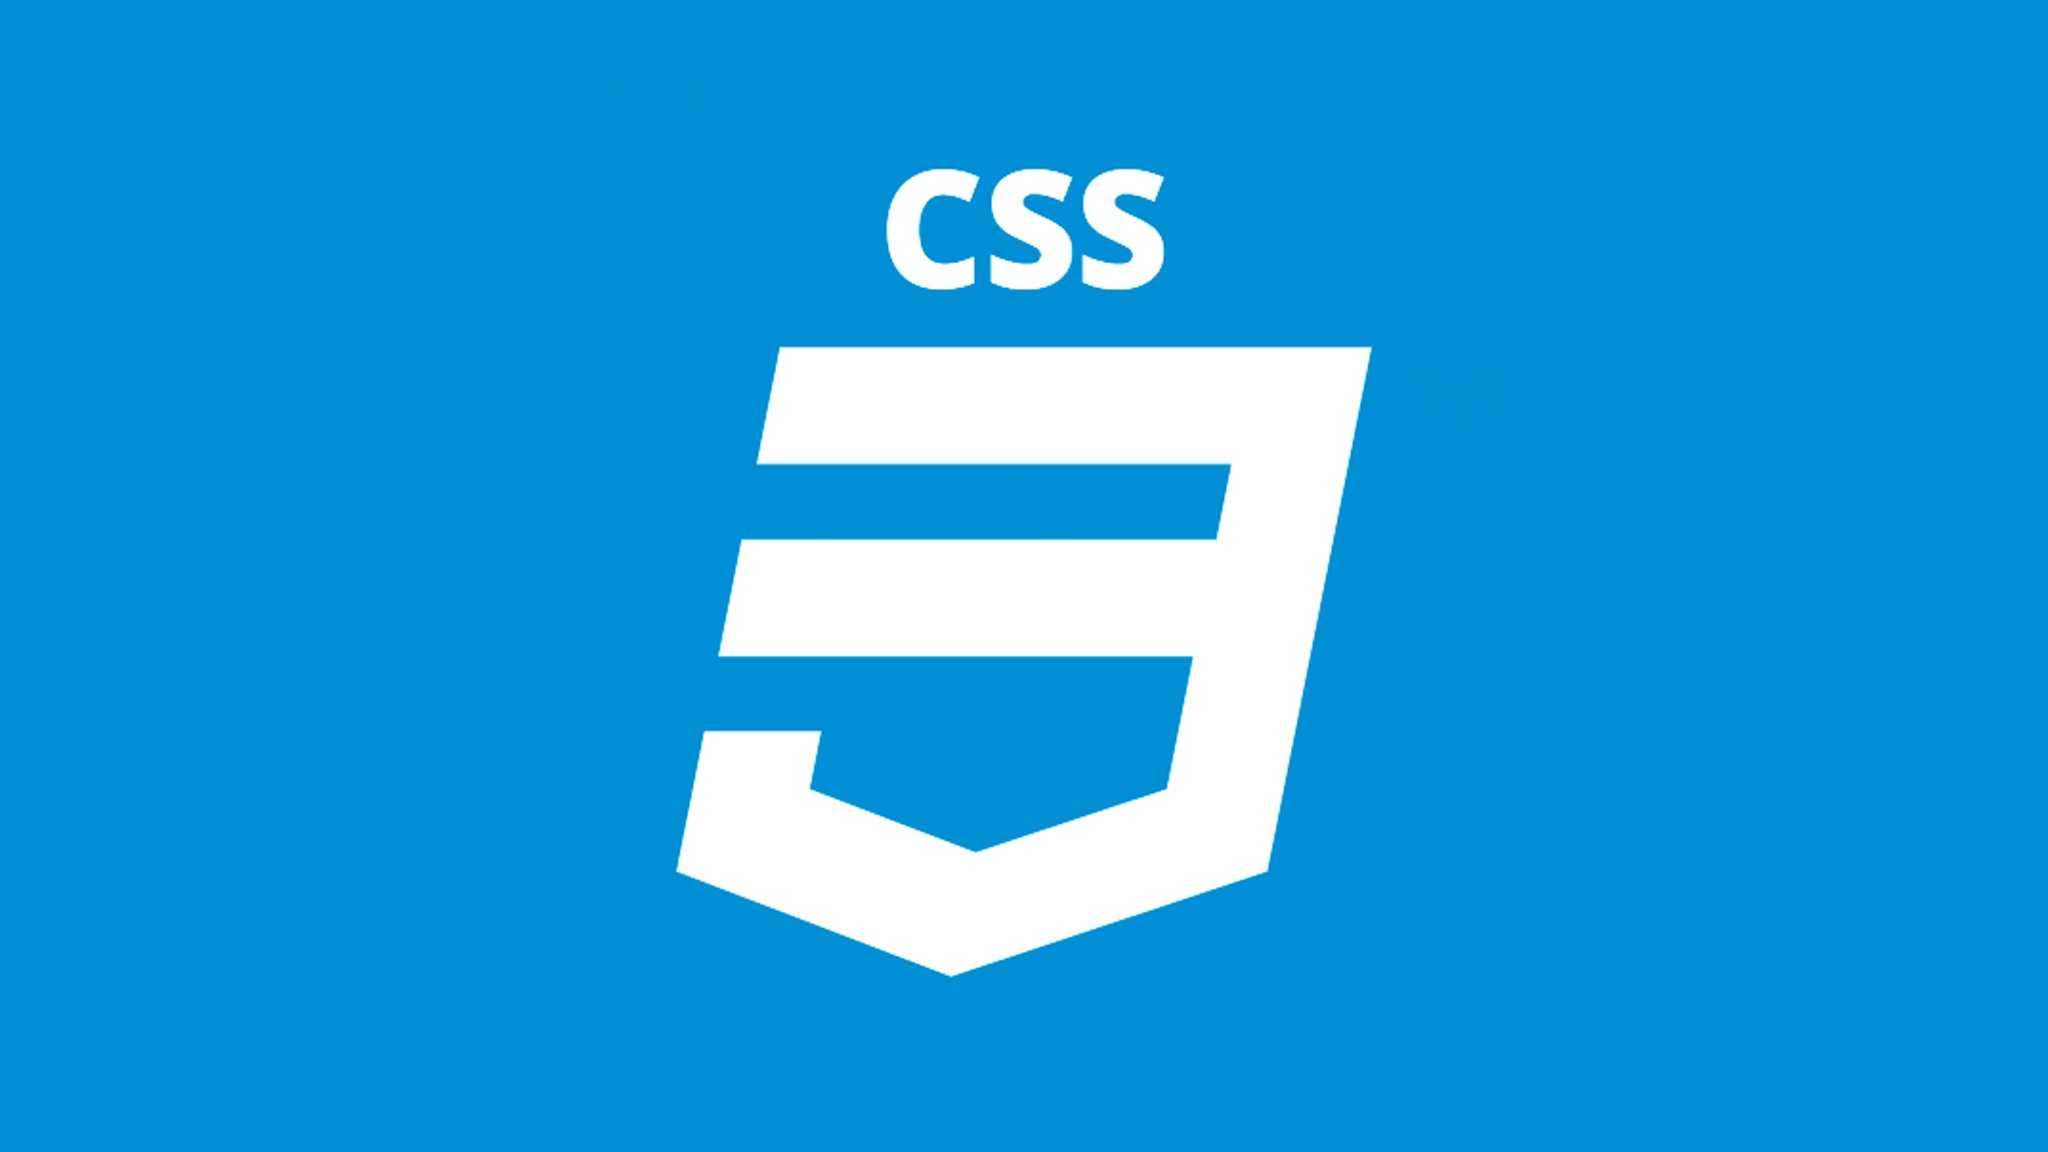 Css backgrounds